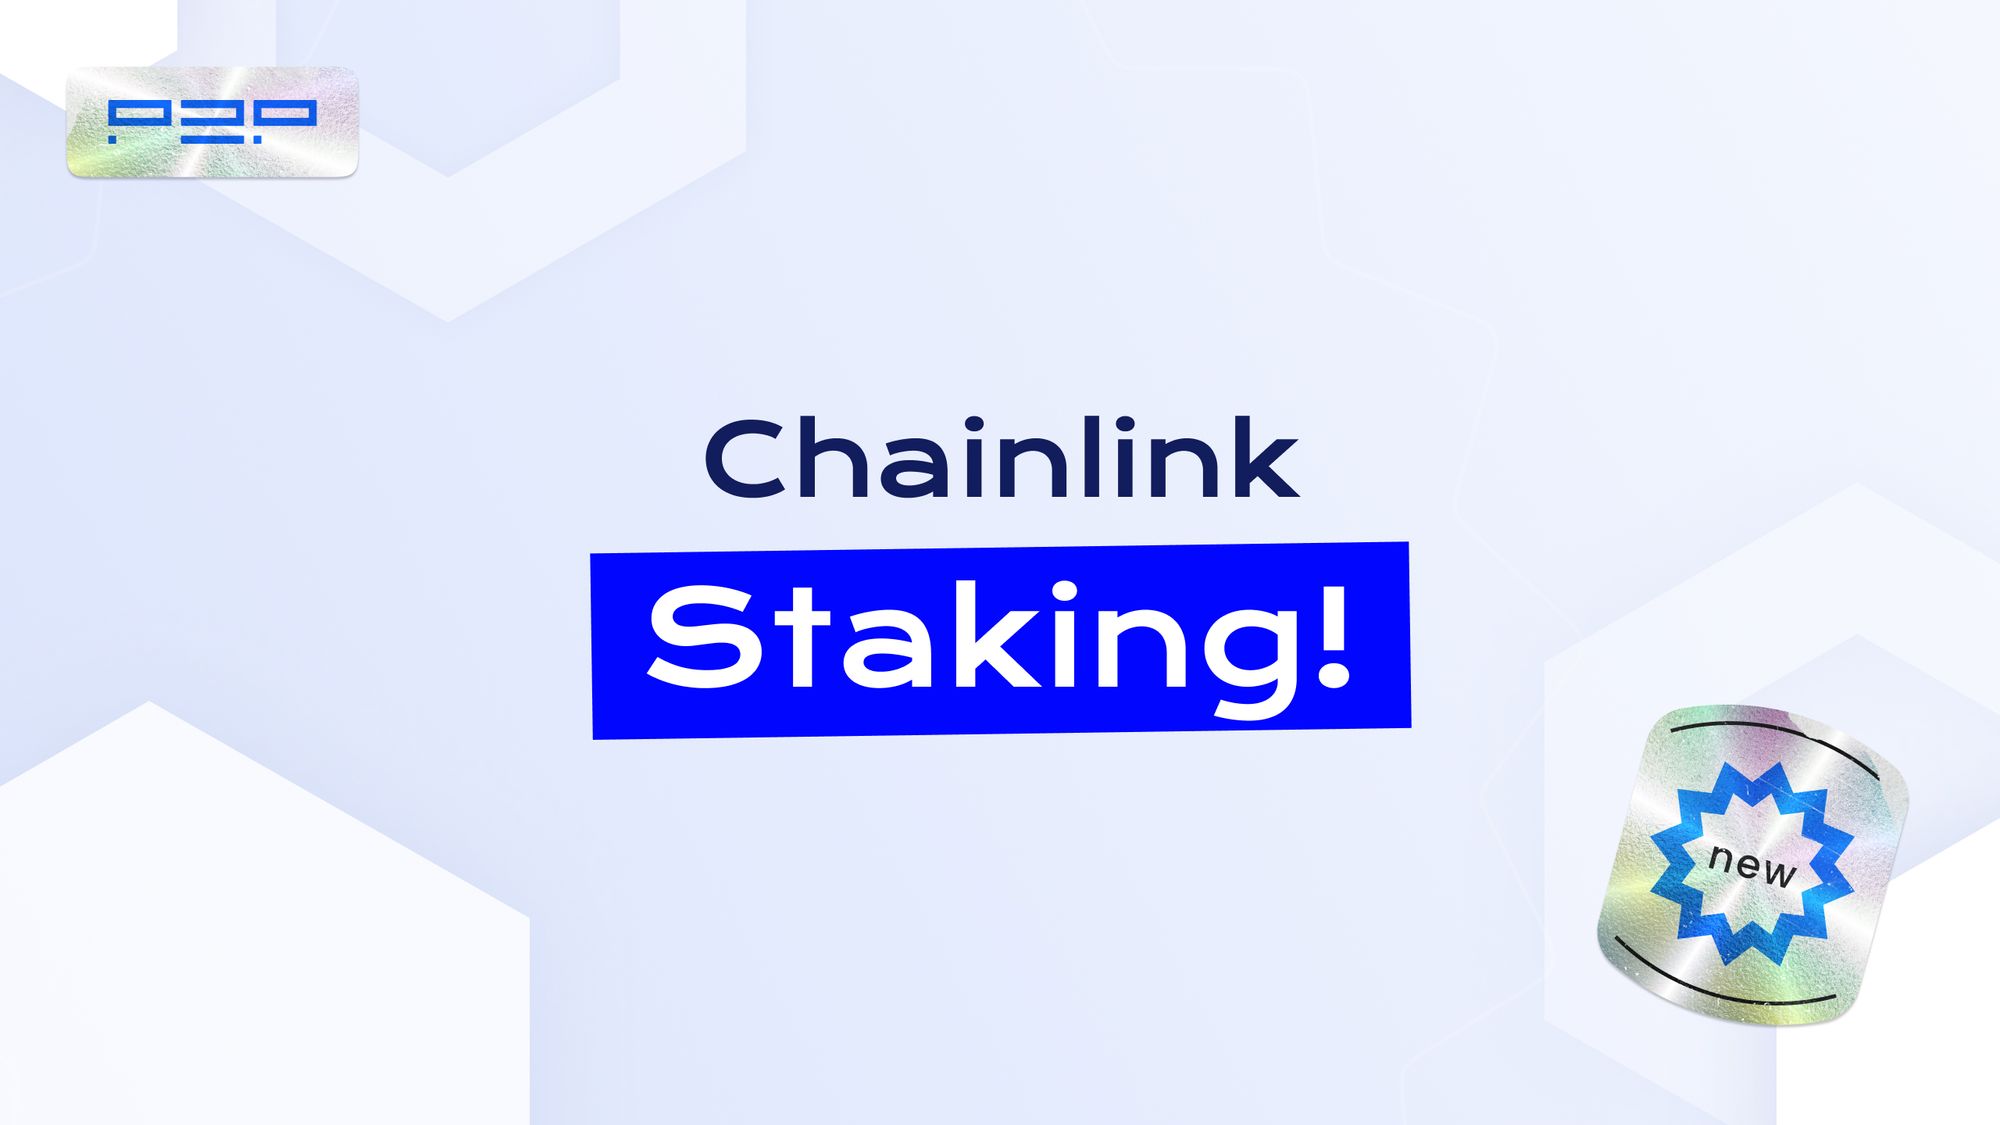 Chainlink staking overview